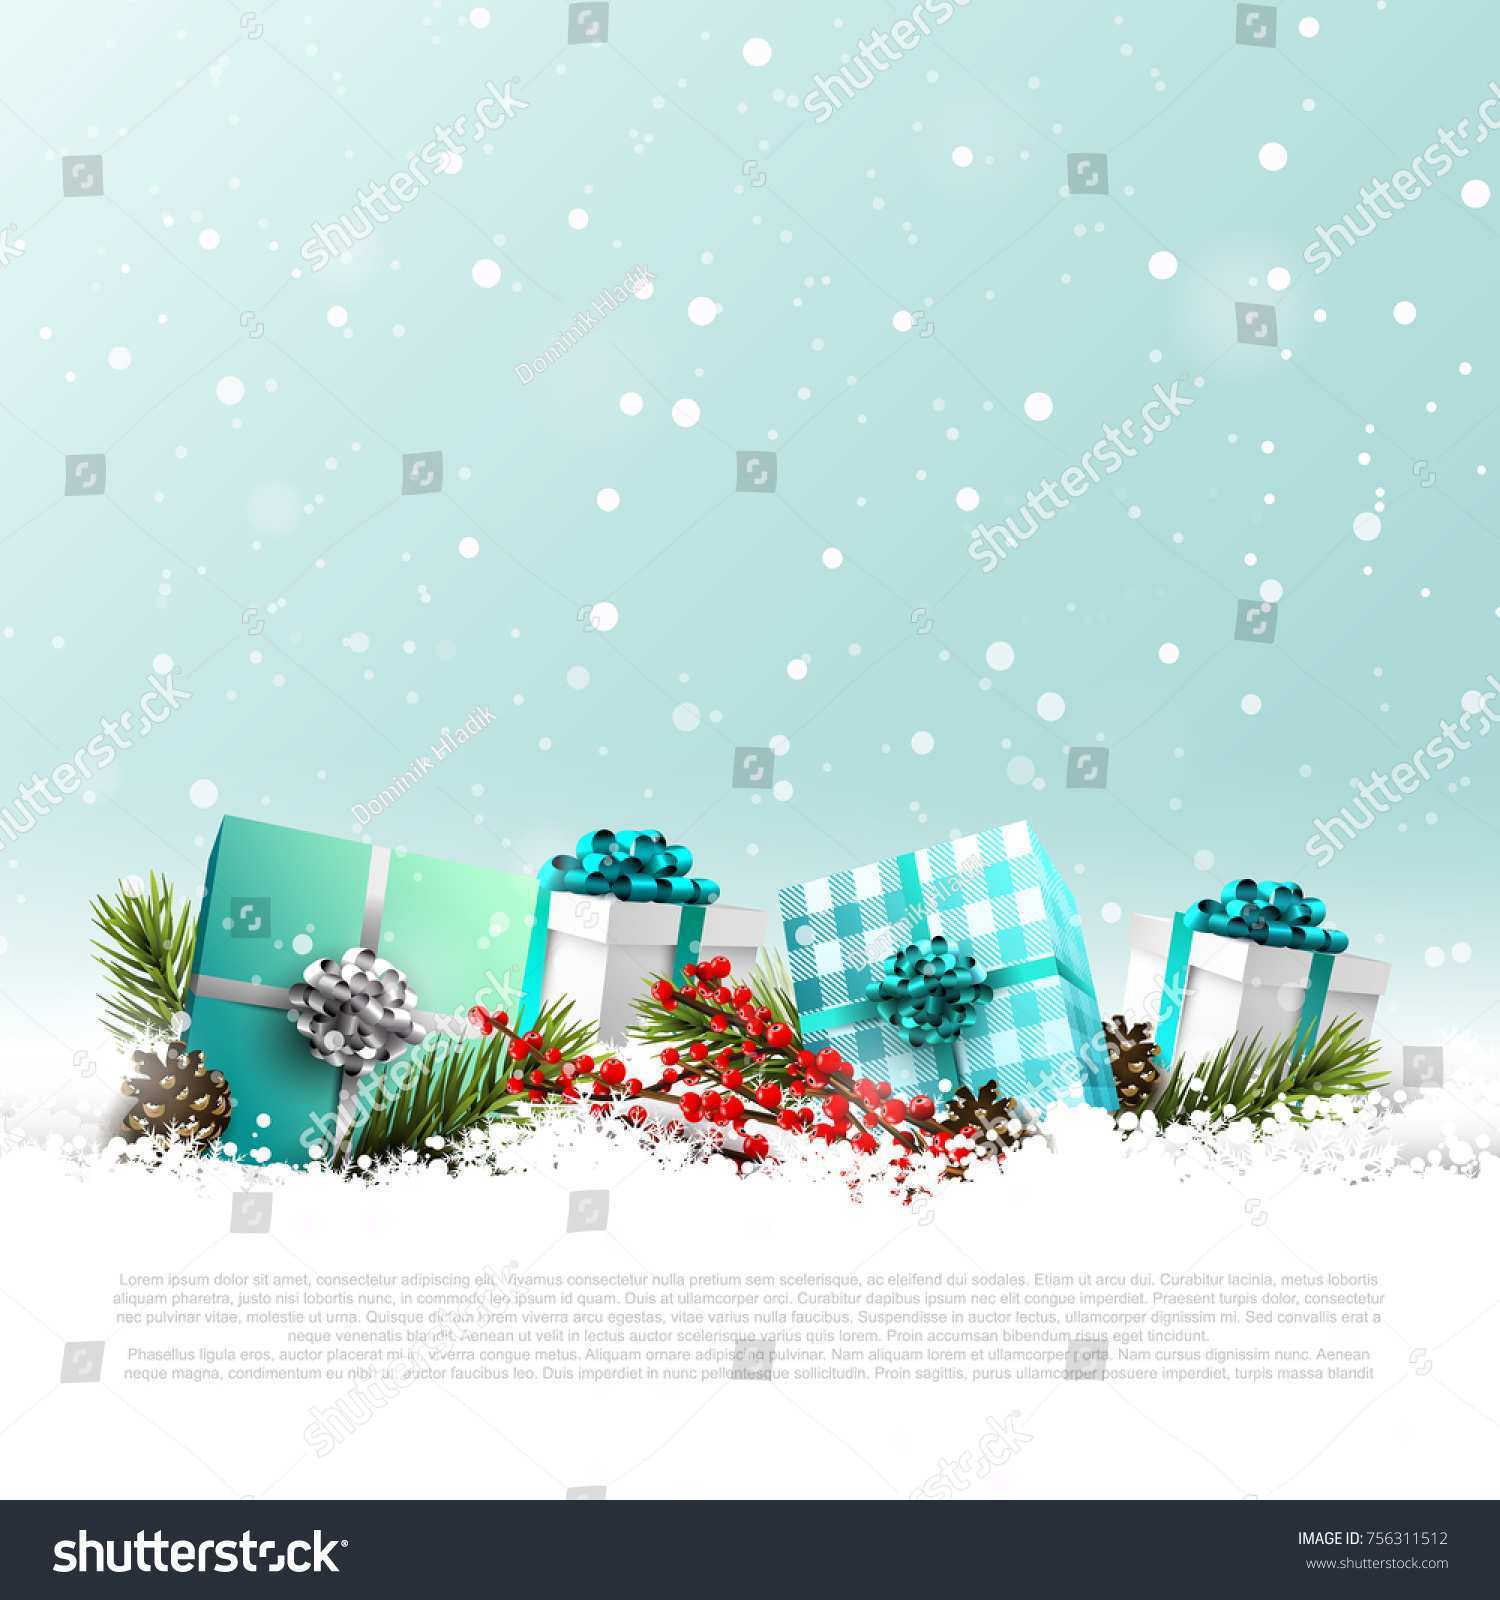 28 Creating Christmas Card Template Snow Photo by Christmas Card Template Snow